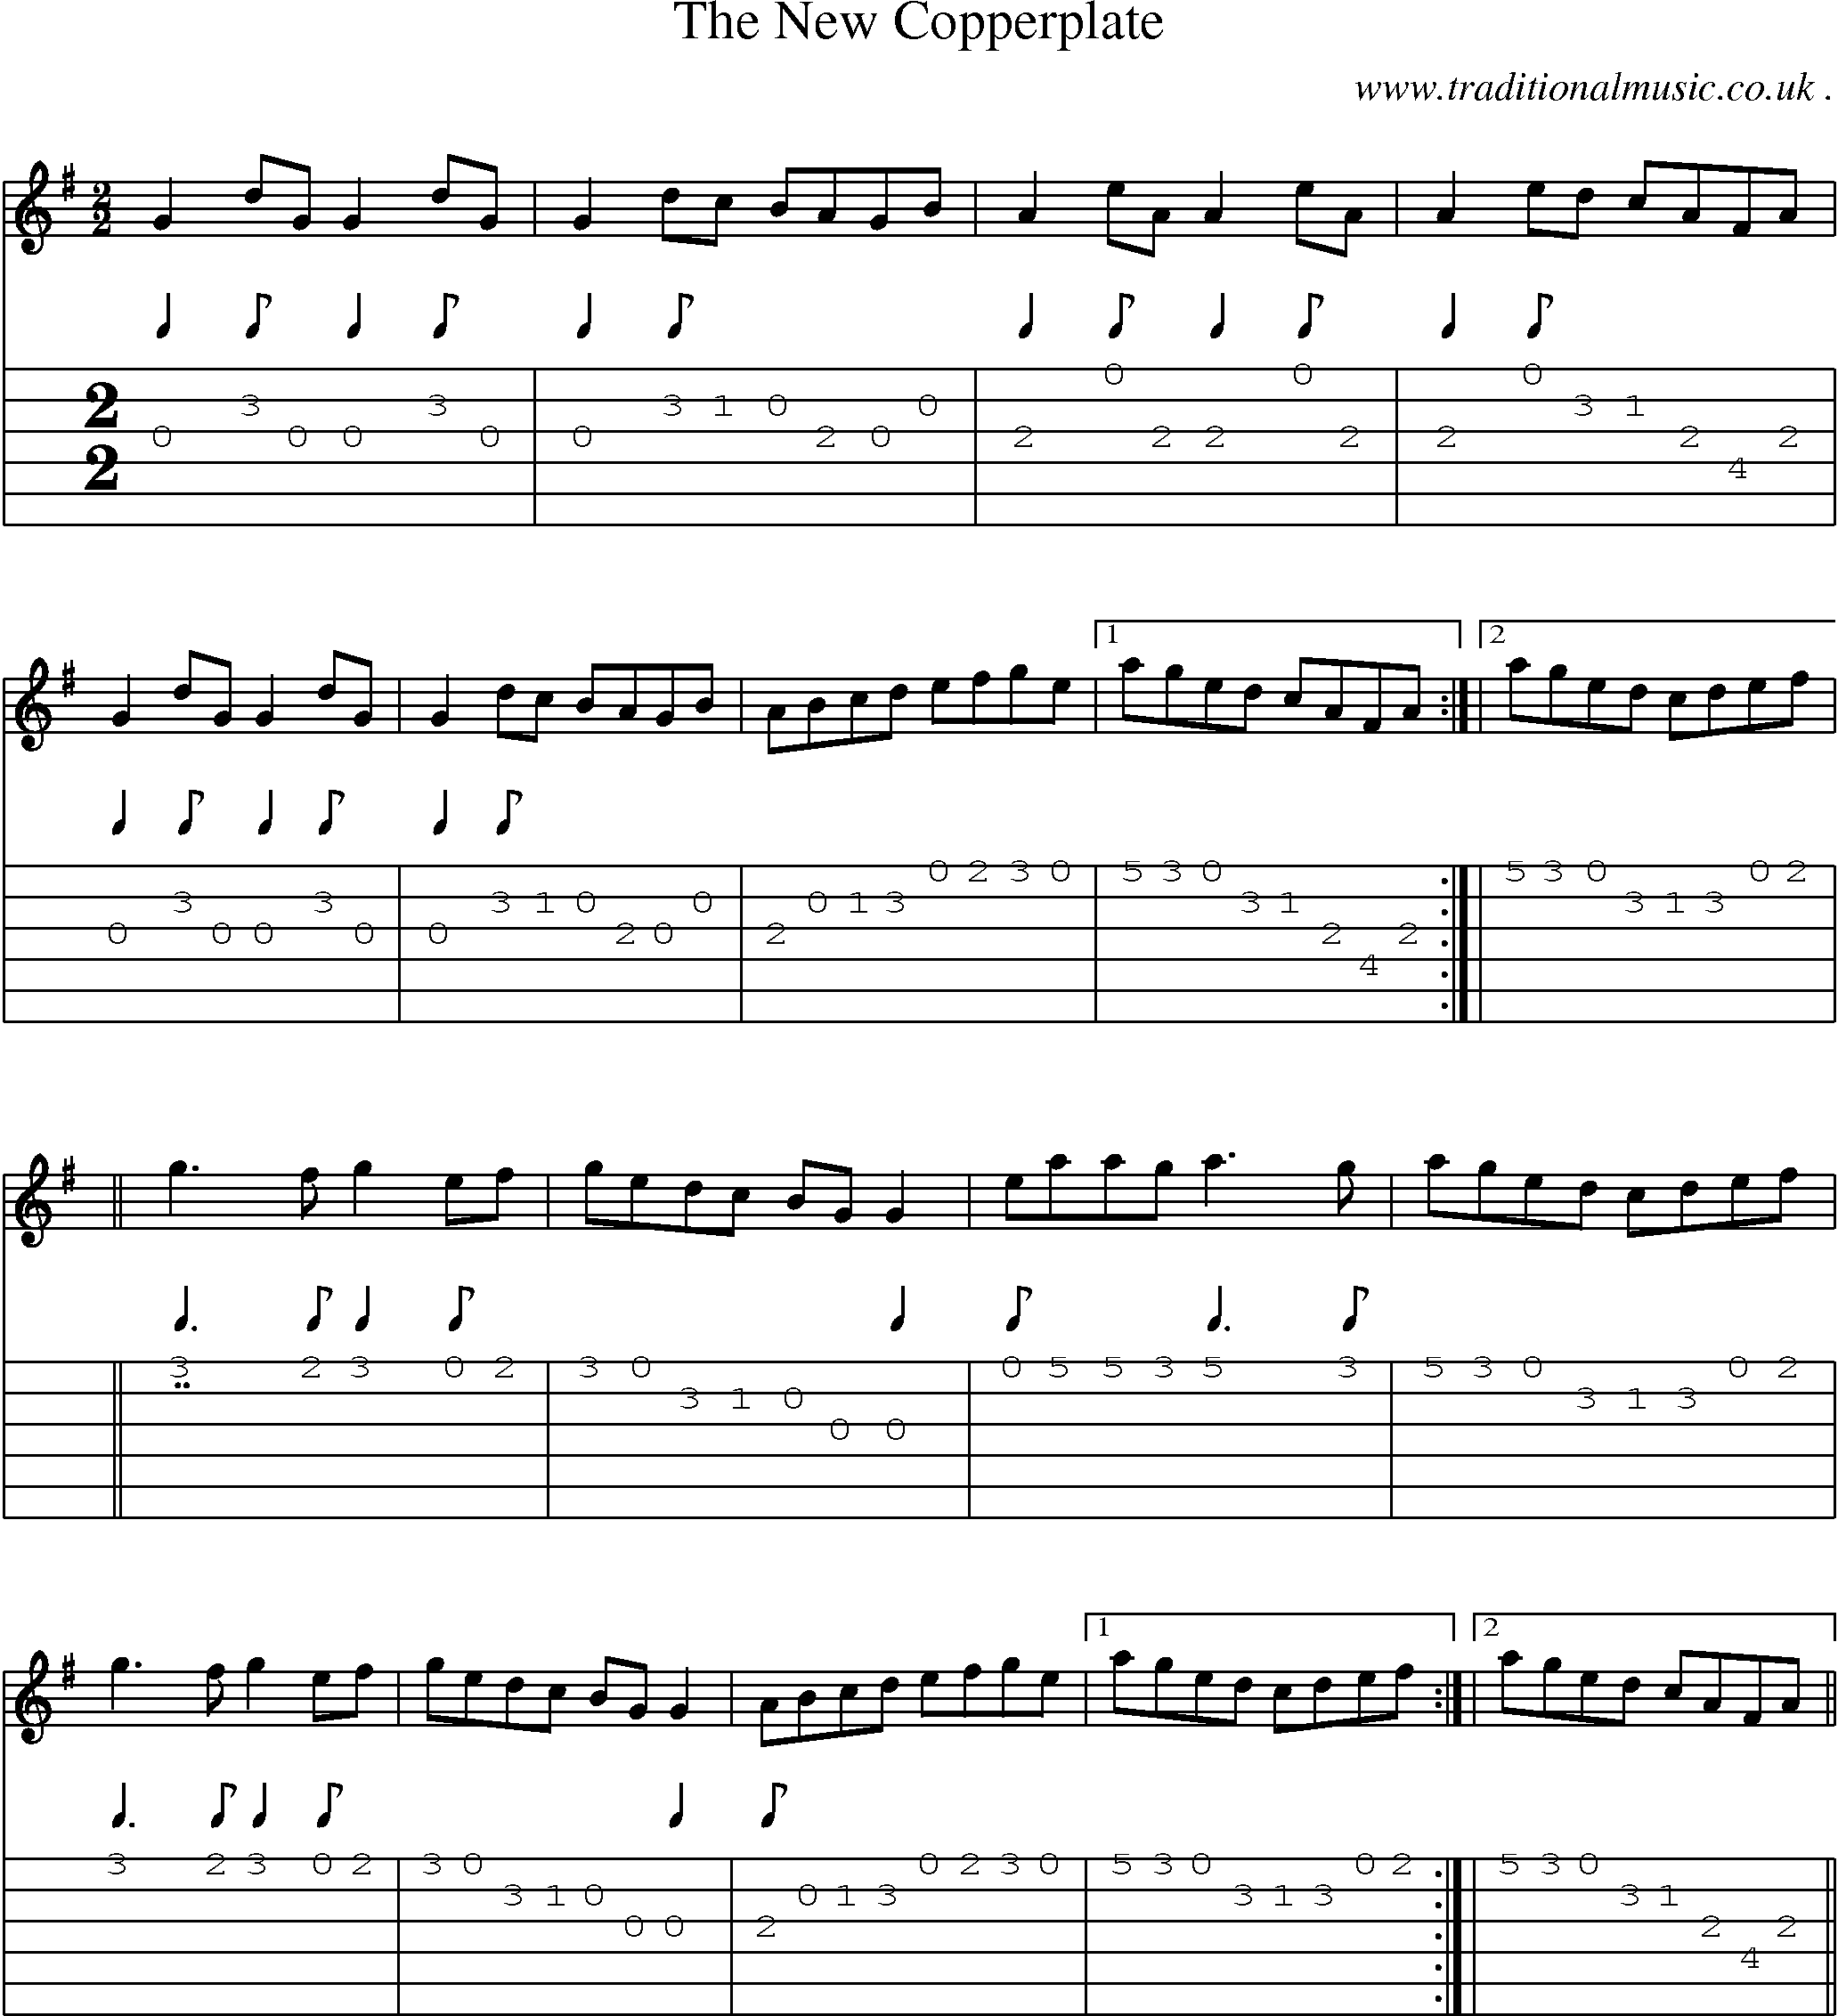 Sheet-Music and Guitar Tabs for The New Copperplate